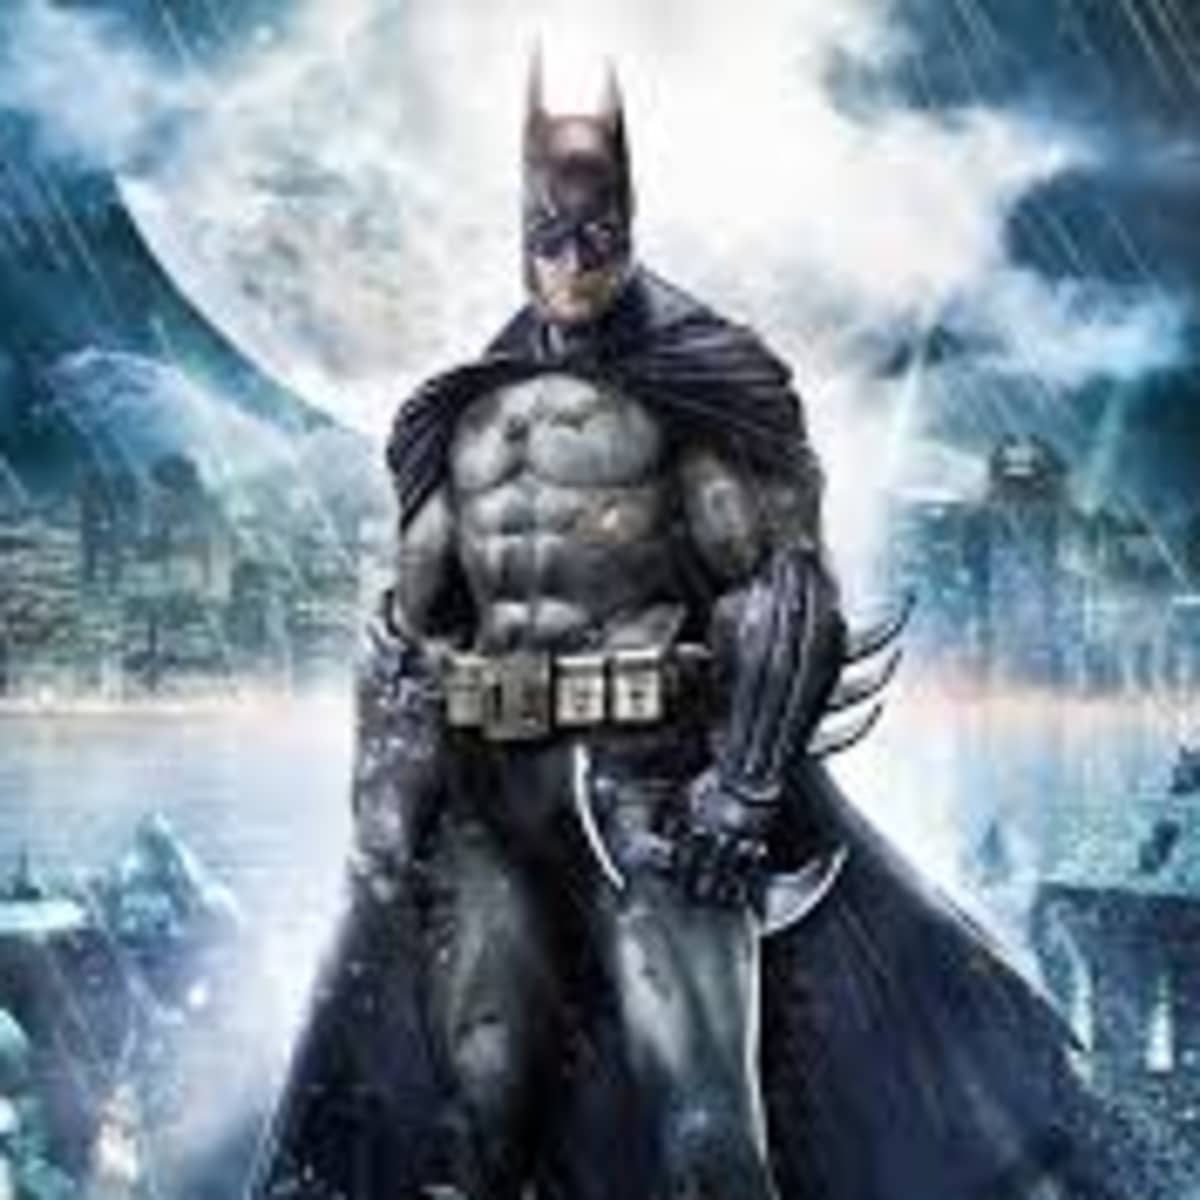 Batman - The Most Important Key Issues - HubPages